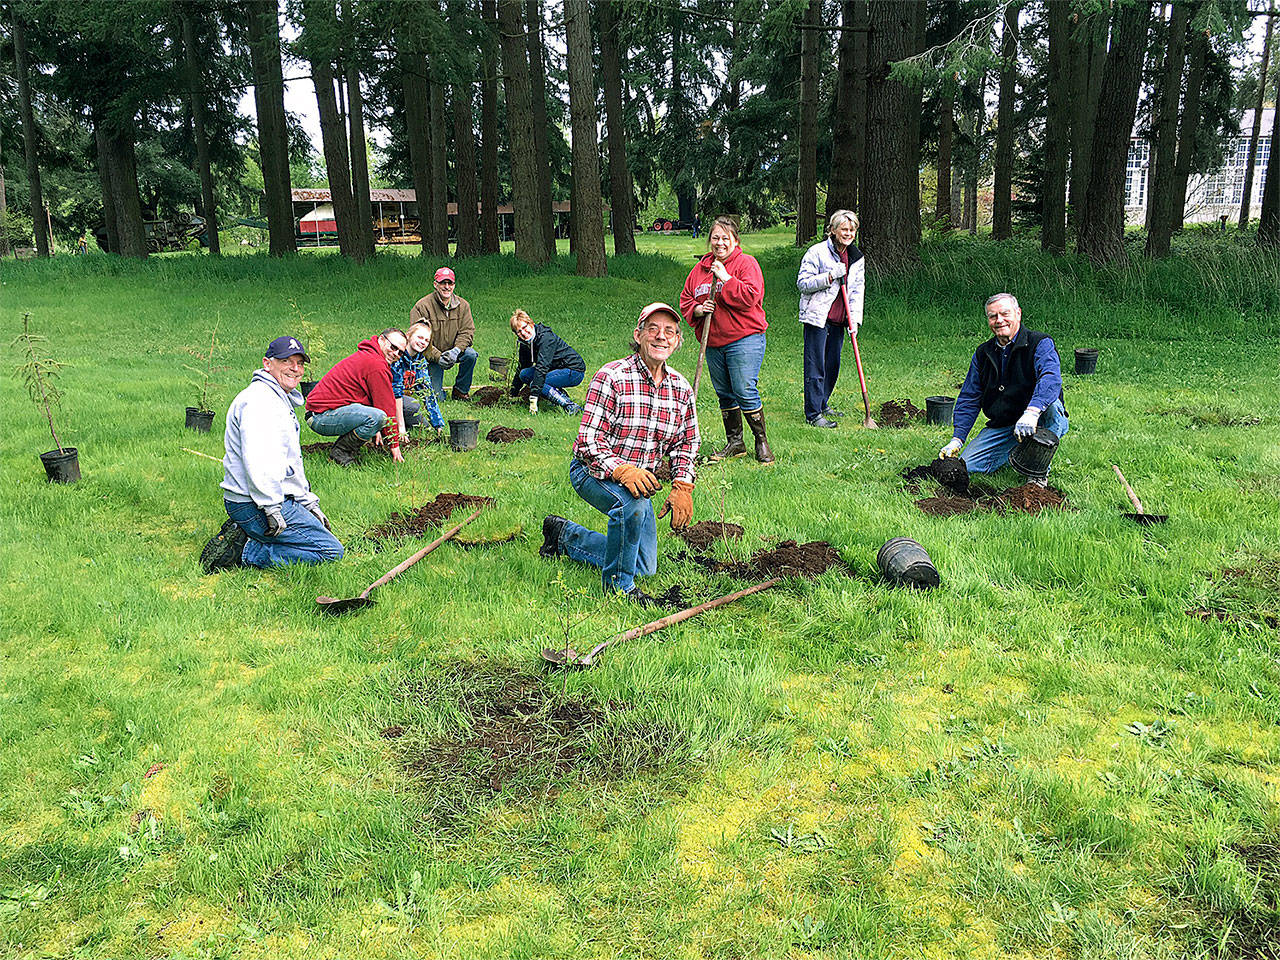 Twenty-five volunteers on April 29 planted over 100 trees and shrubs along Portage Creek at Stillaguamish Valley Pioneer Park in Arlington in honor of Arbor Day. (Contributed photo)